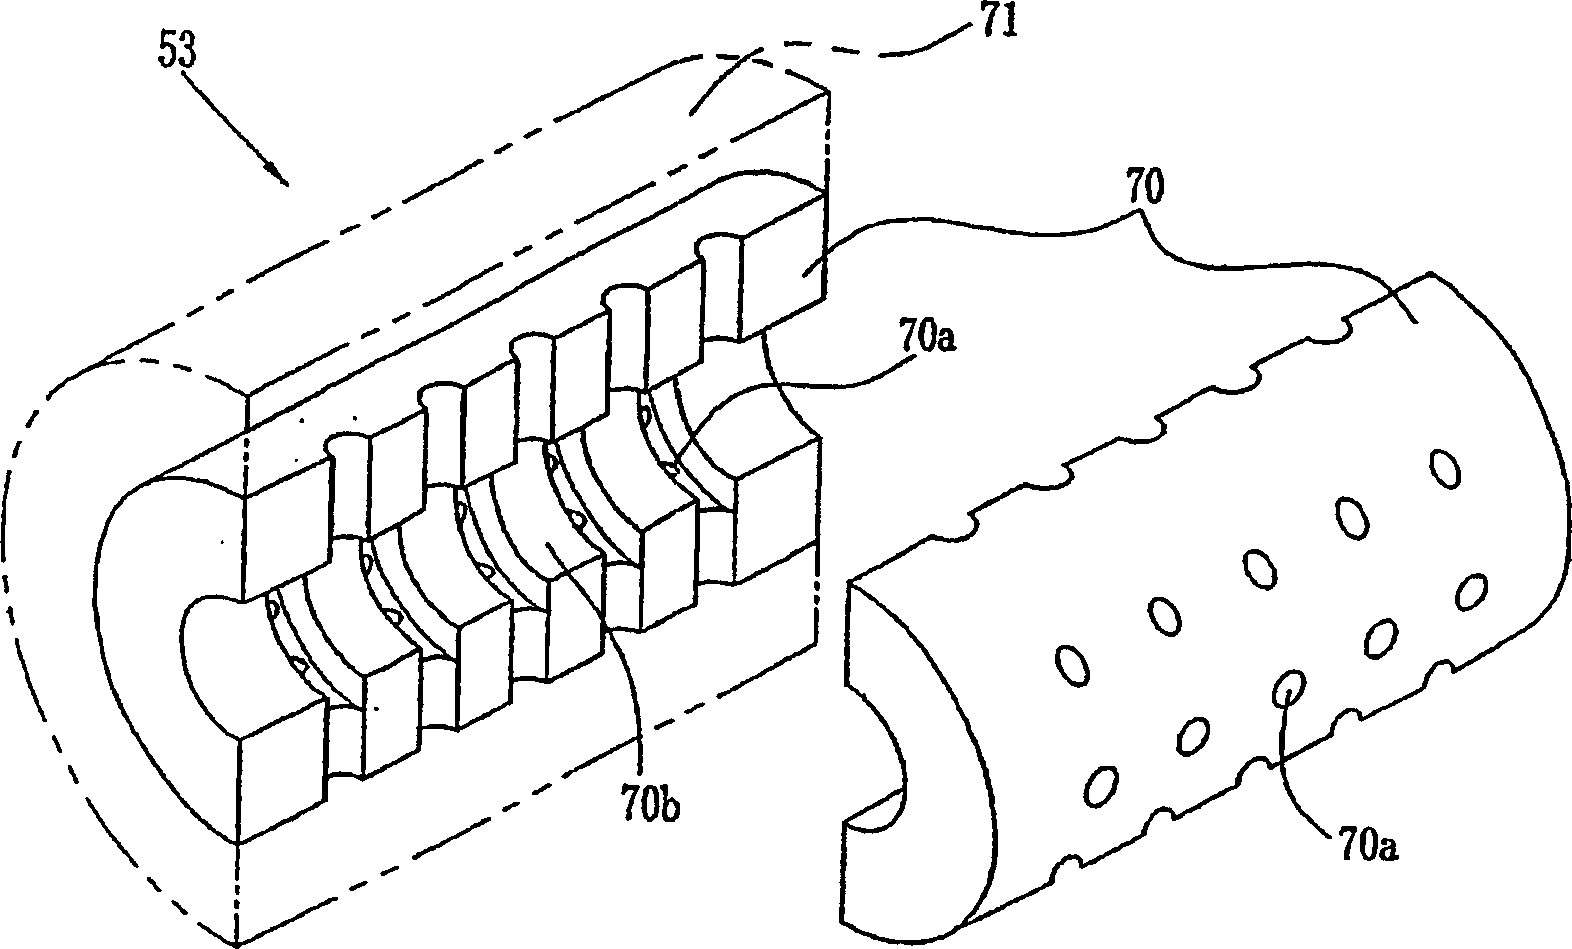 Preform for producing plastic optical components, method of fabricating the preform, and plastic optical fiber